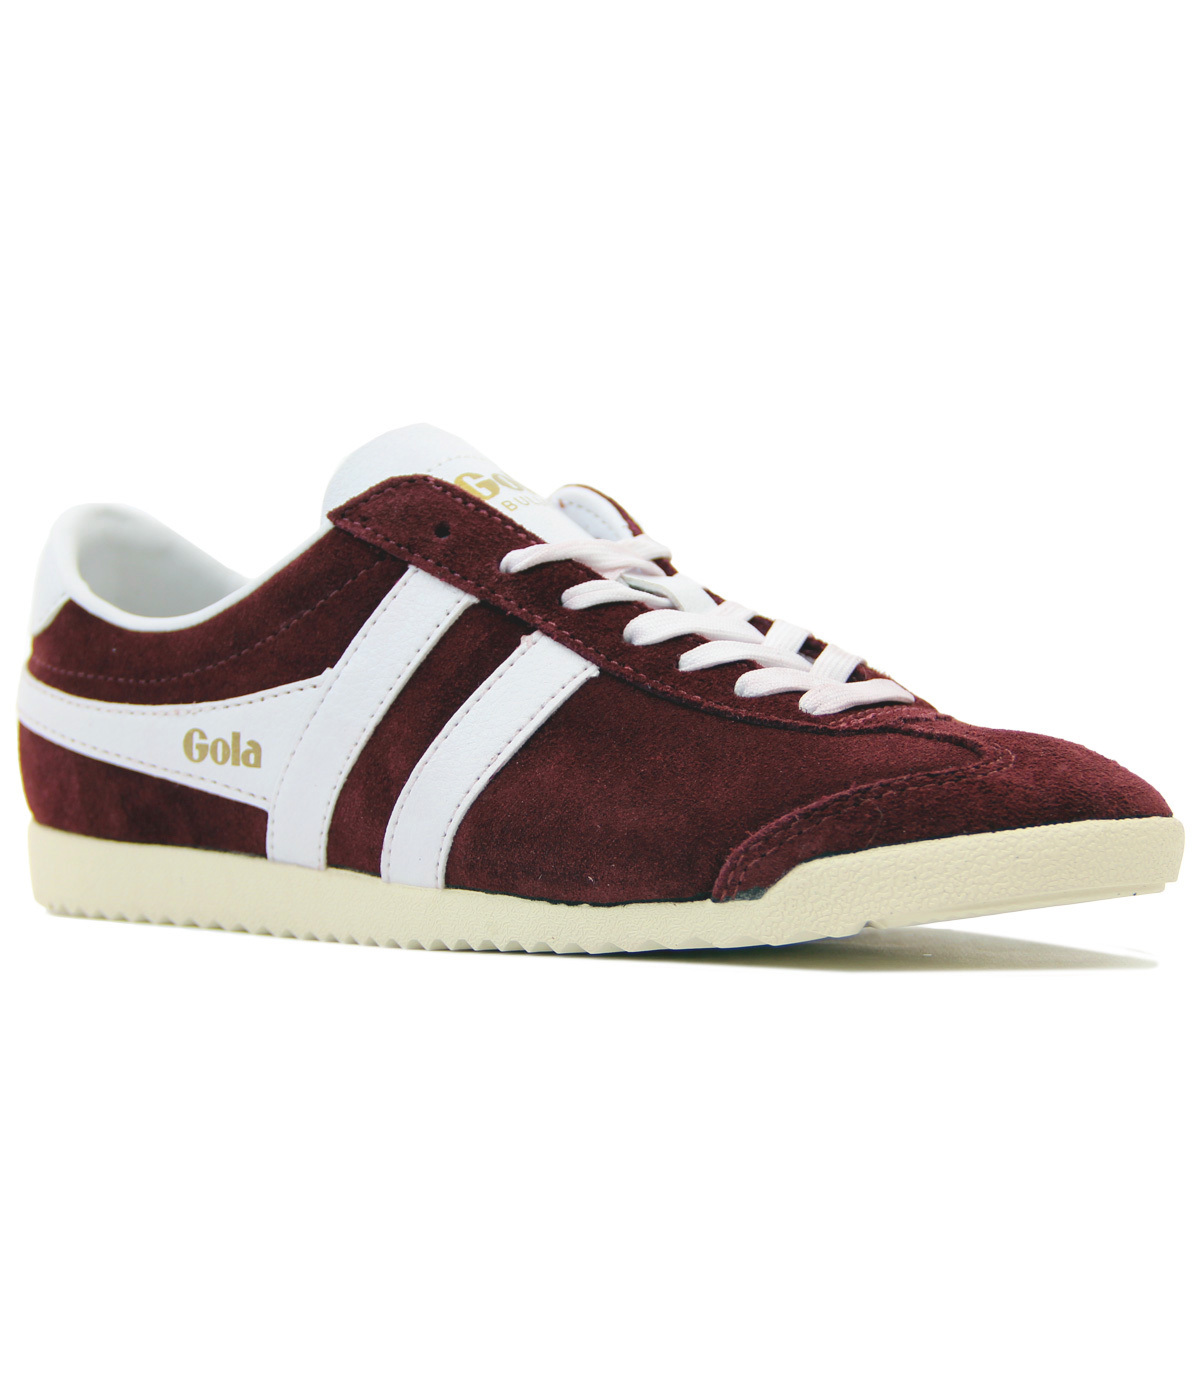 GOLA Bullet Womens Retro Suede Trainers BURGUNDY